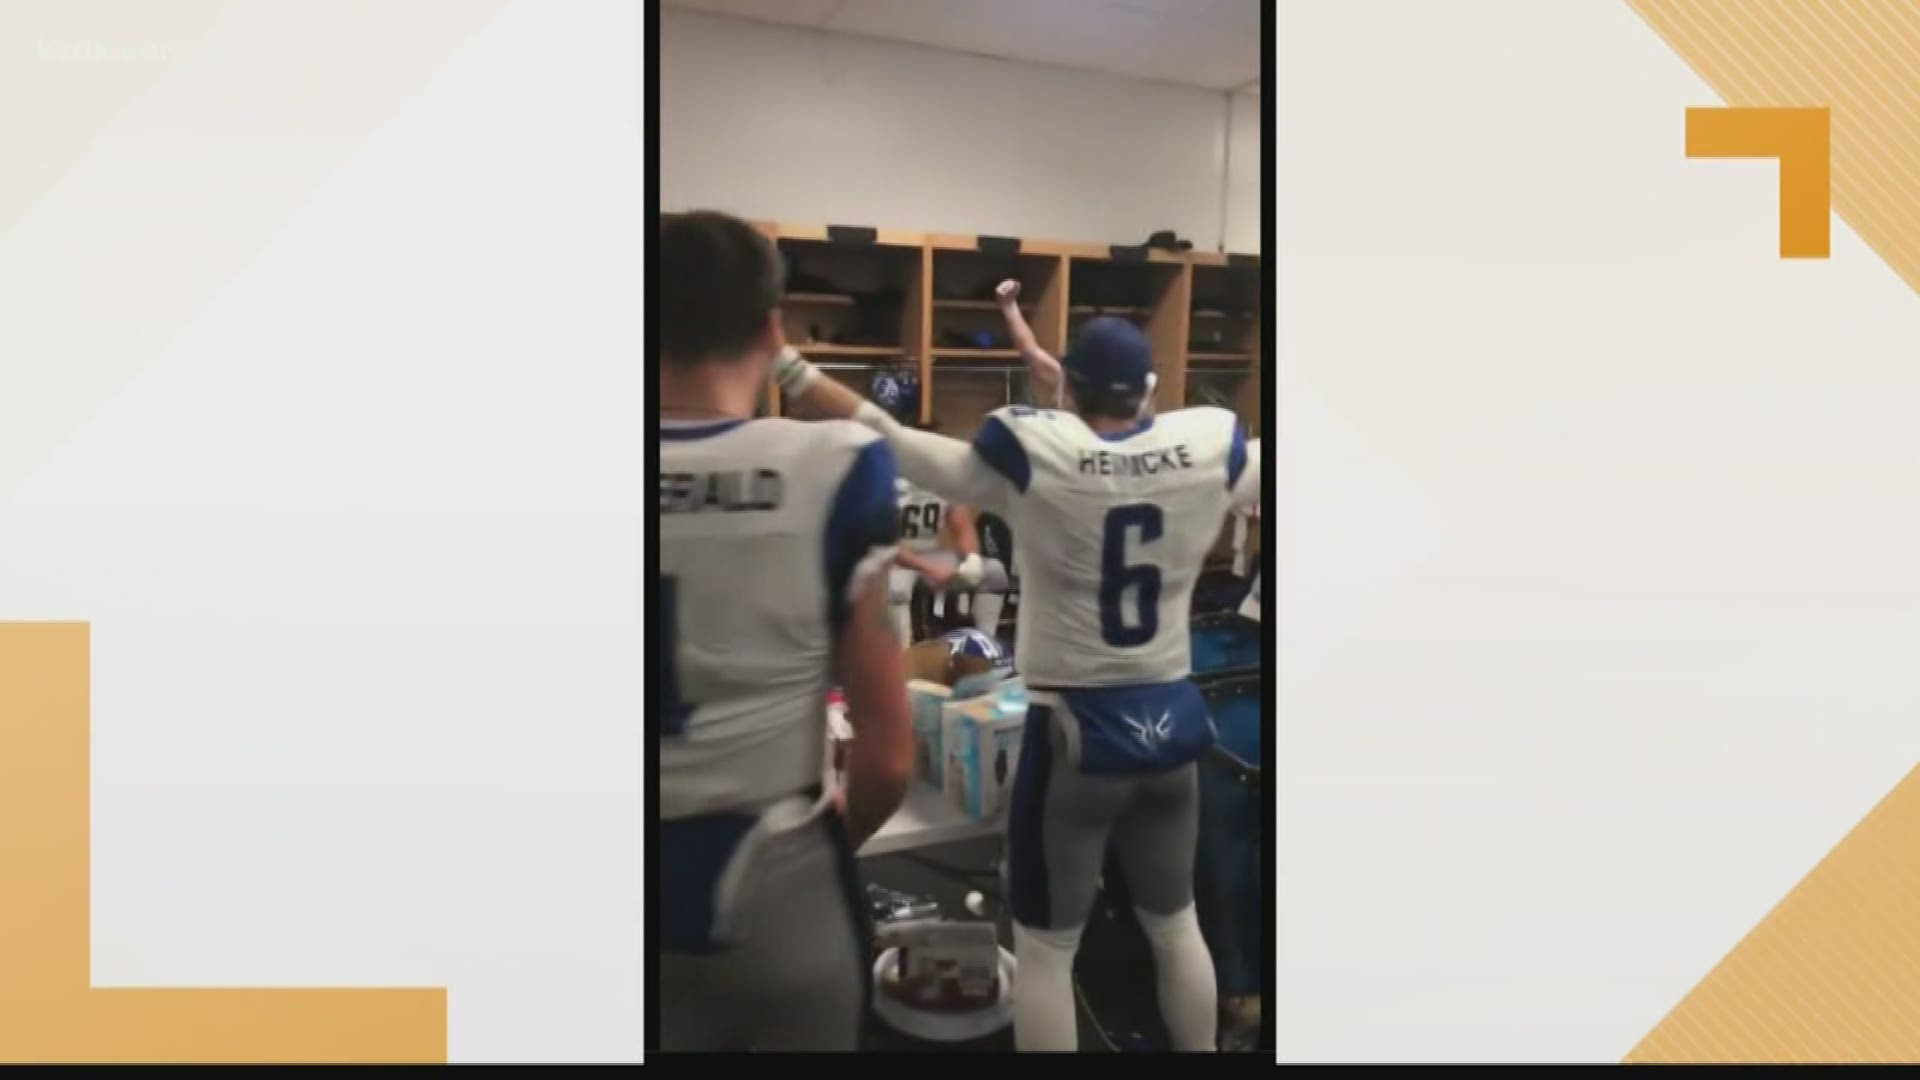 Two players chugged Bud Light Seltzers to celebrate.